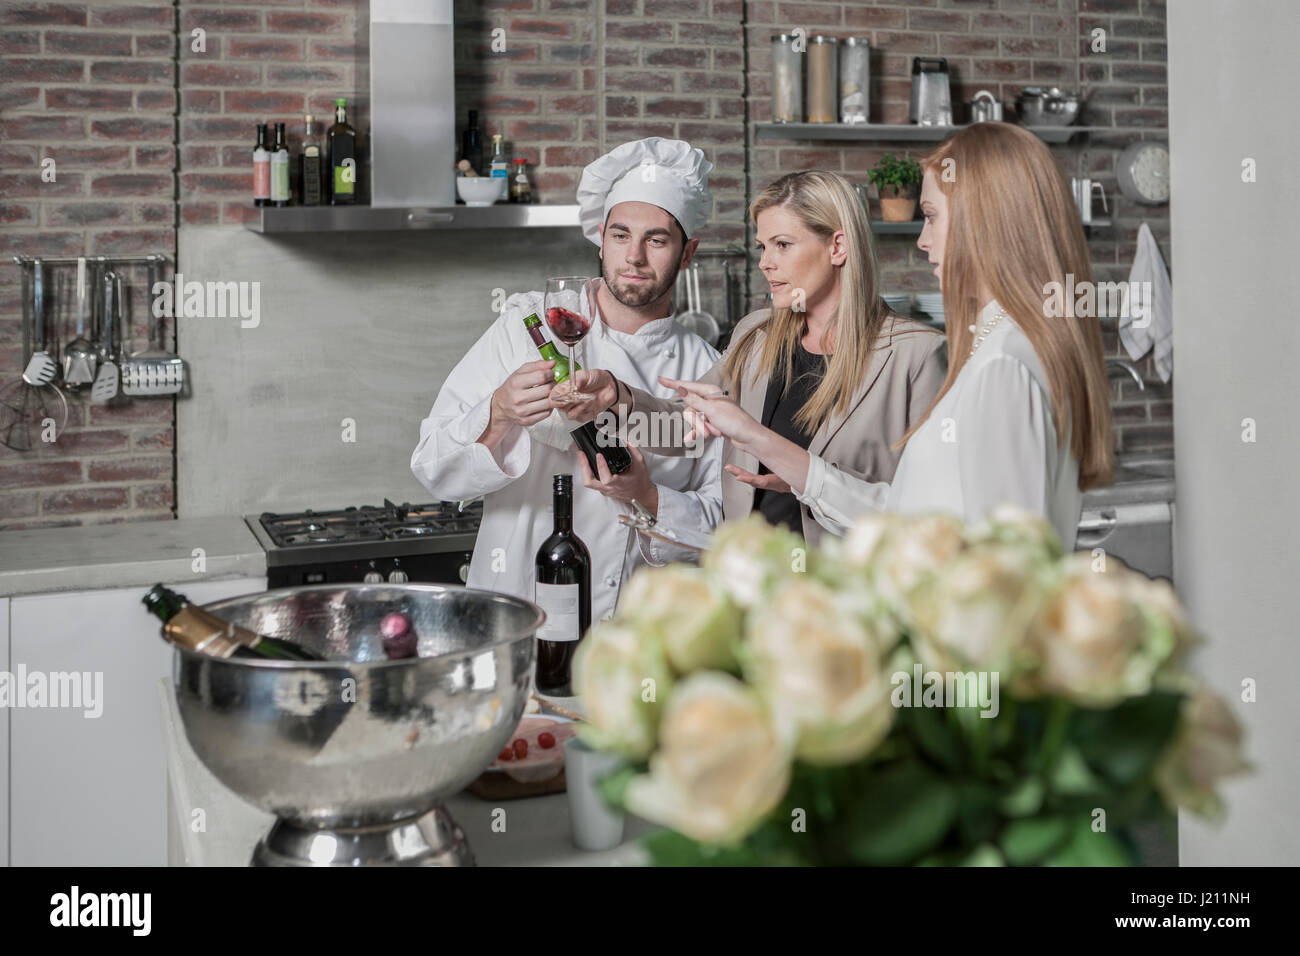 Chef with two women in kitchen tasting wine Stock Photo